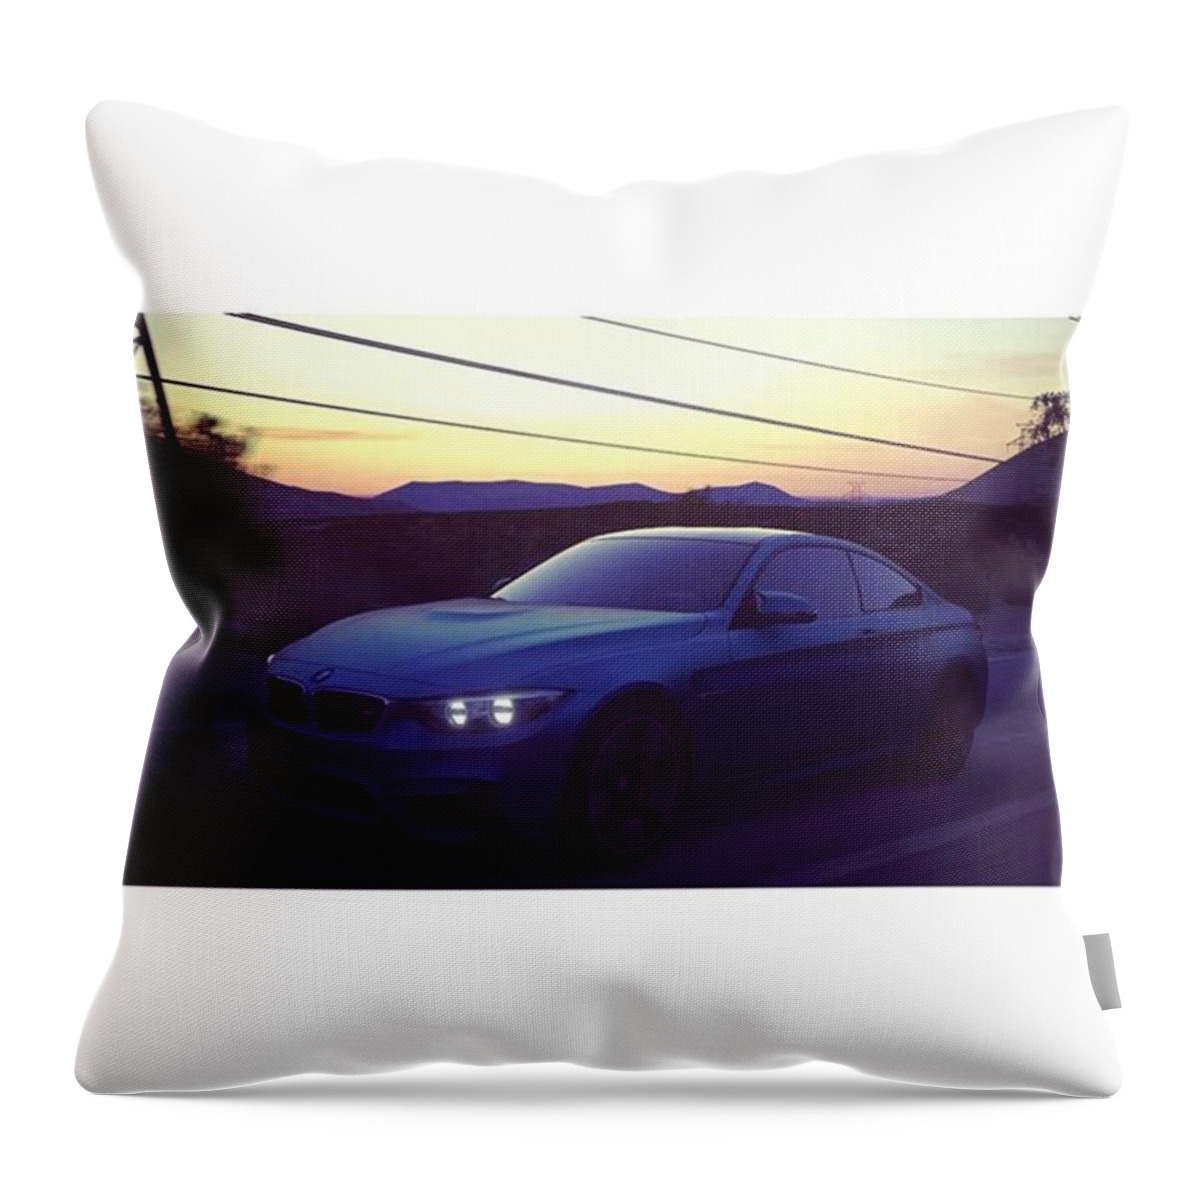 M4 Throw Pillow featuring the photograph #bmw #m4 #sunset #desert #driveclub #1 by Hannes Lachner